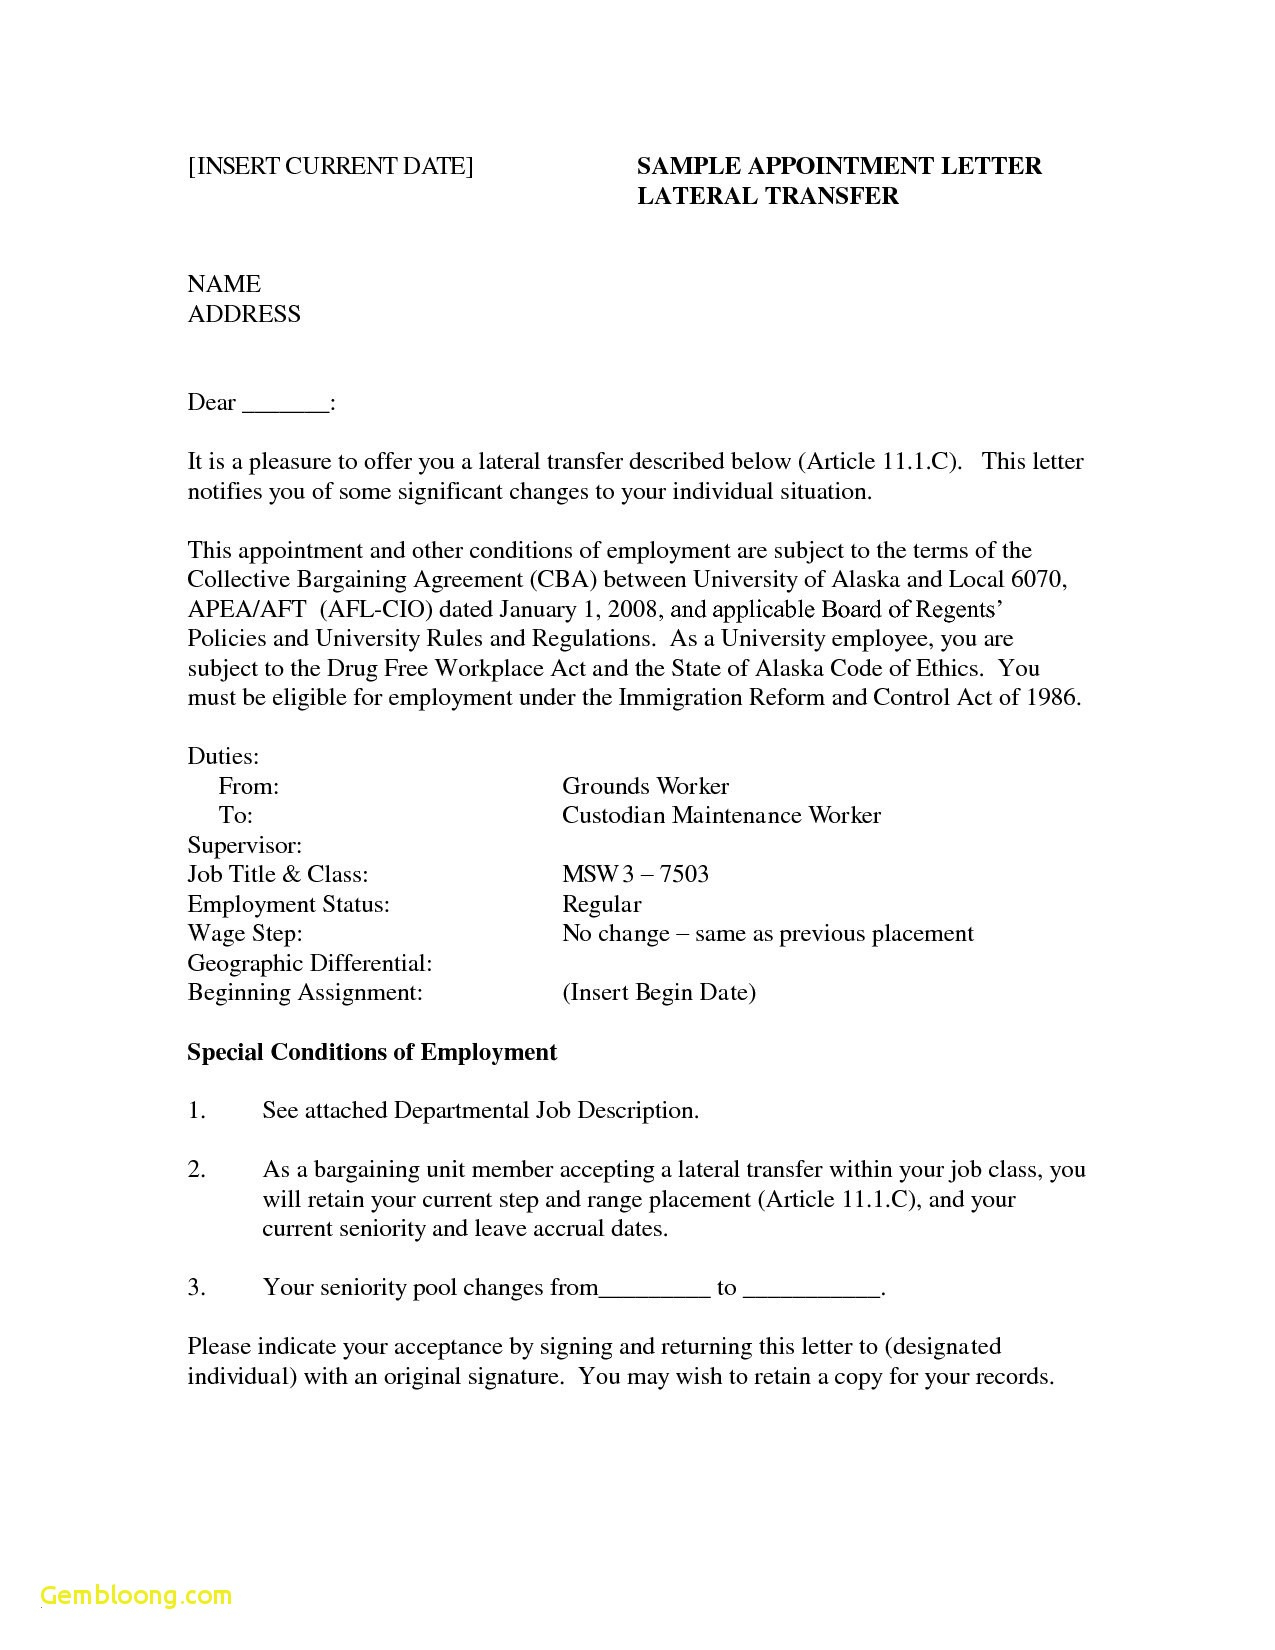 Relocation Cover Letter Template - Resume Builder Free Template Sfonthebridge Sfonthebridge